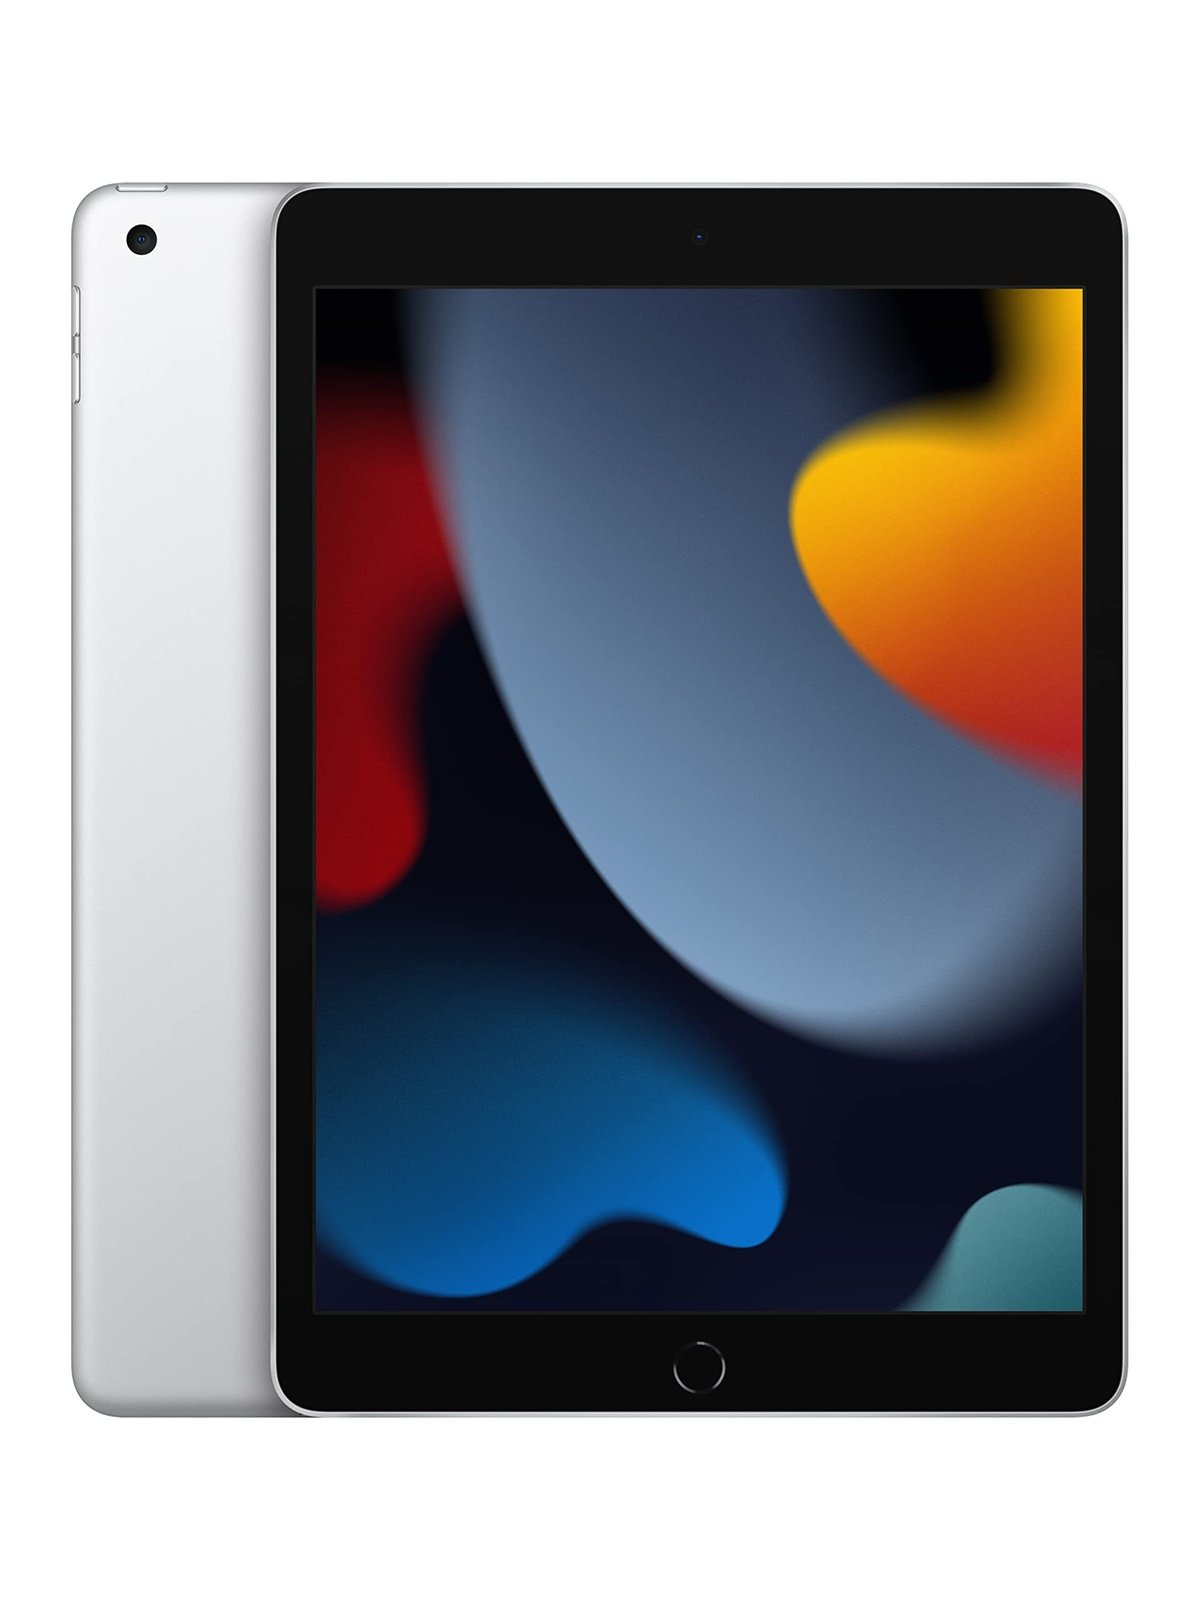 Apple iPad (9th Generation): with A13 Bionic chip, 10.2-inch Retina Display, 64GB, Wi-Fi, 12MP front/8MP Back Camera, Touch ID, All-Day Battery Life – Silver